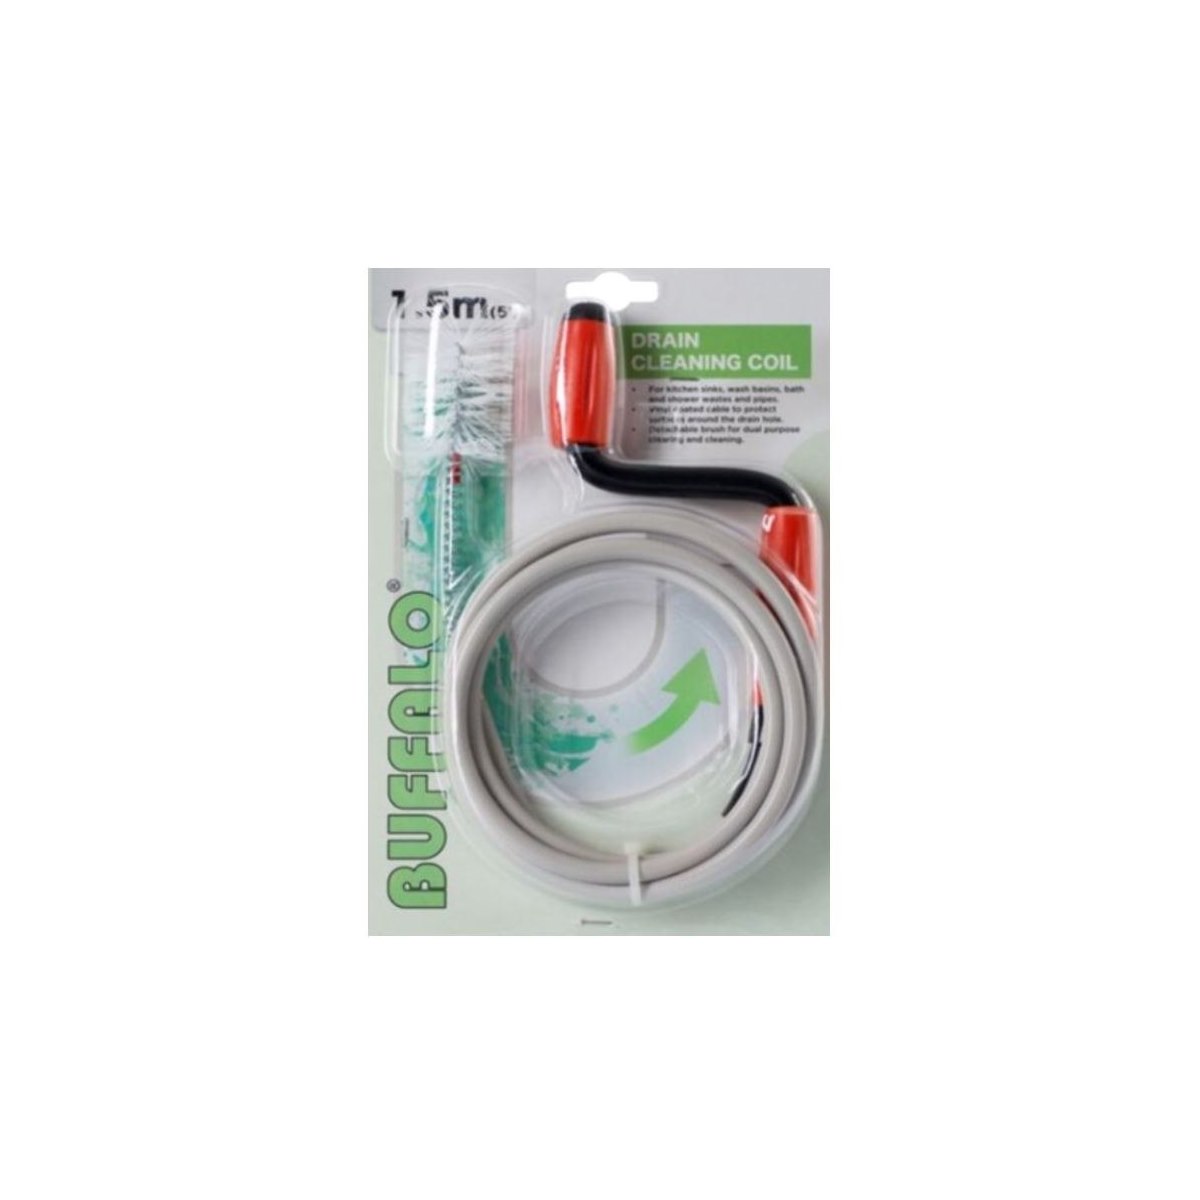 Buffalo Drain Cleaning Coil 1.5m 5in